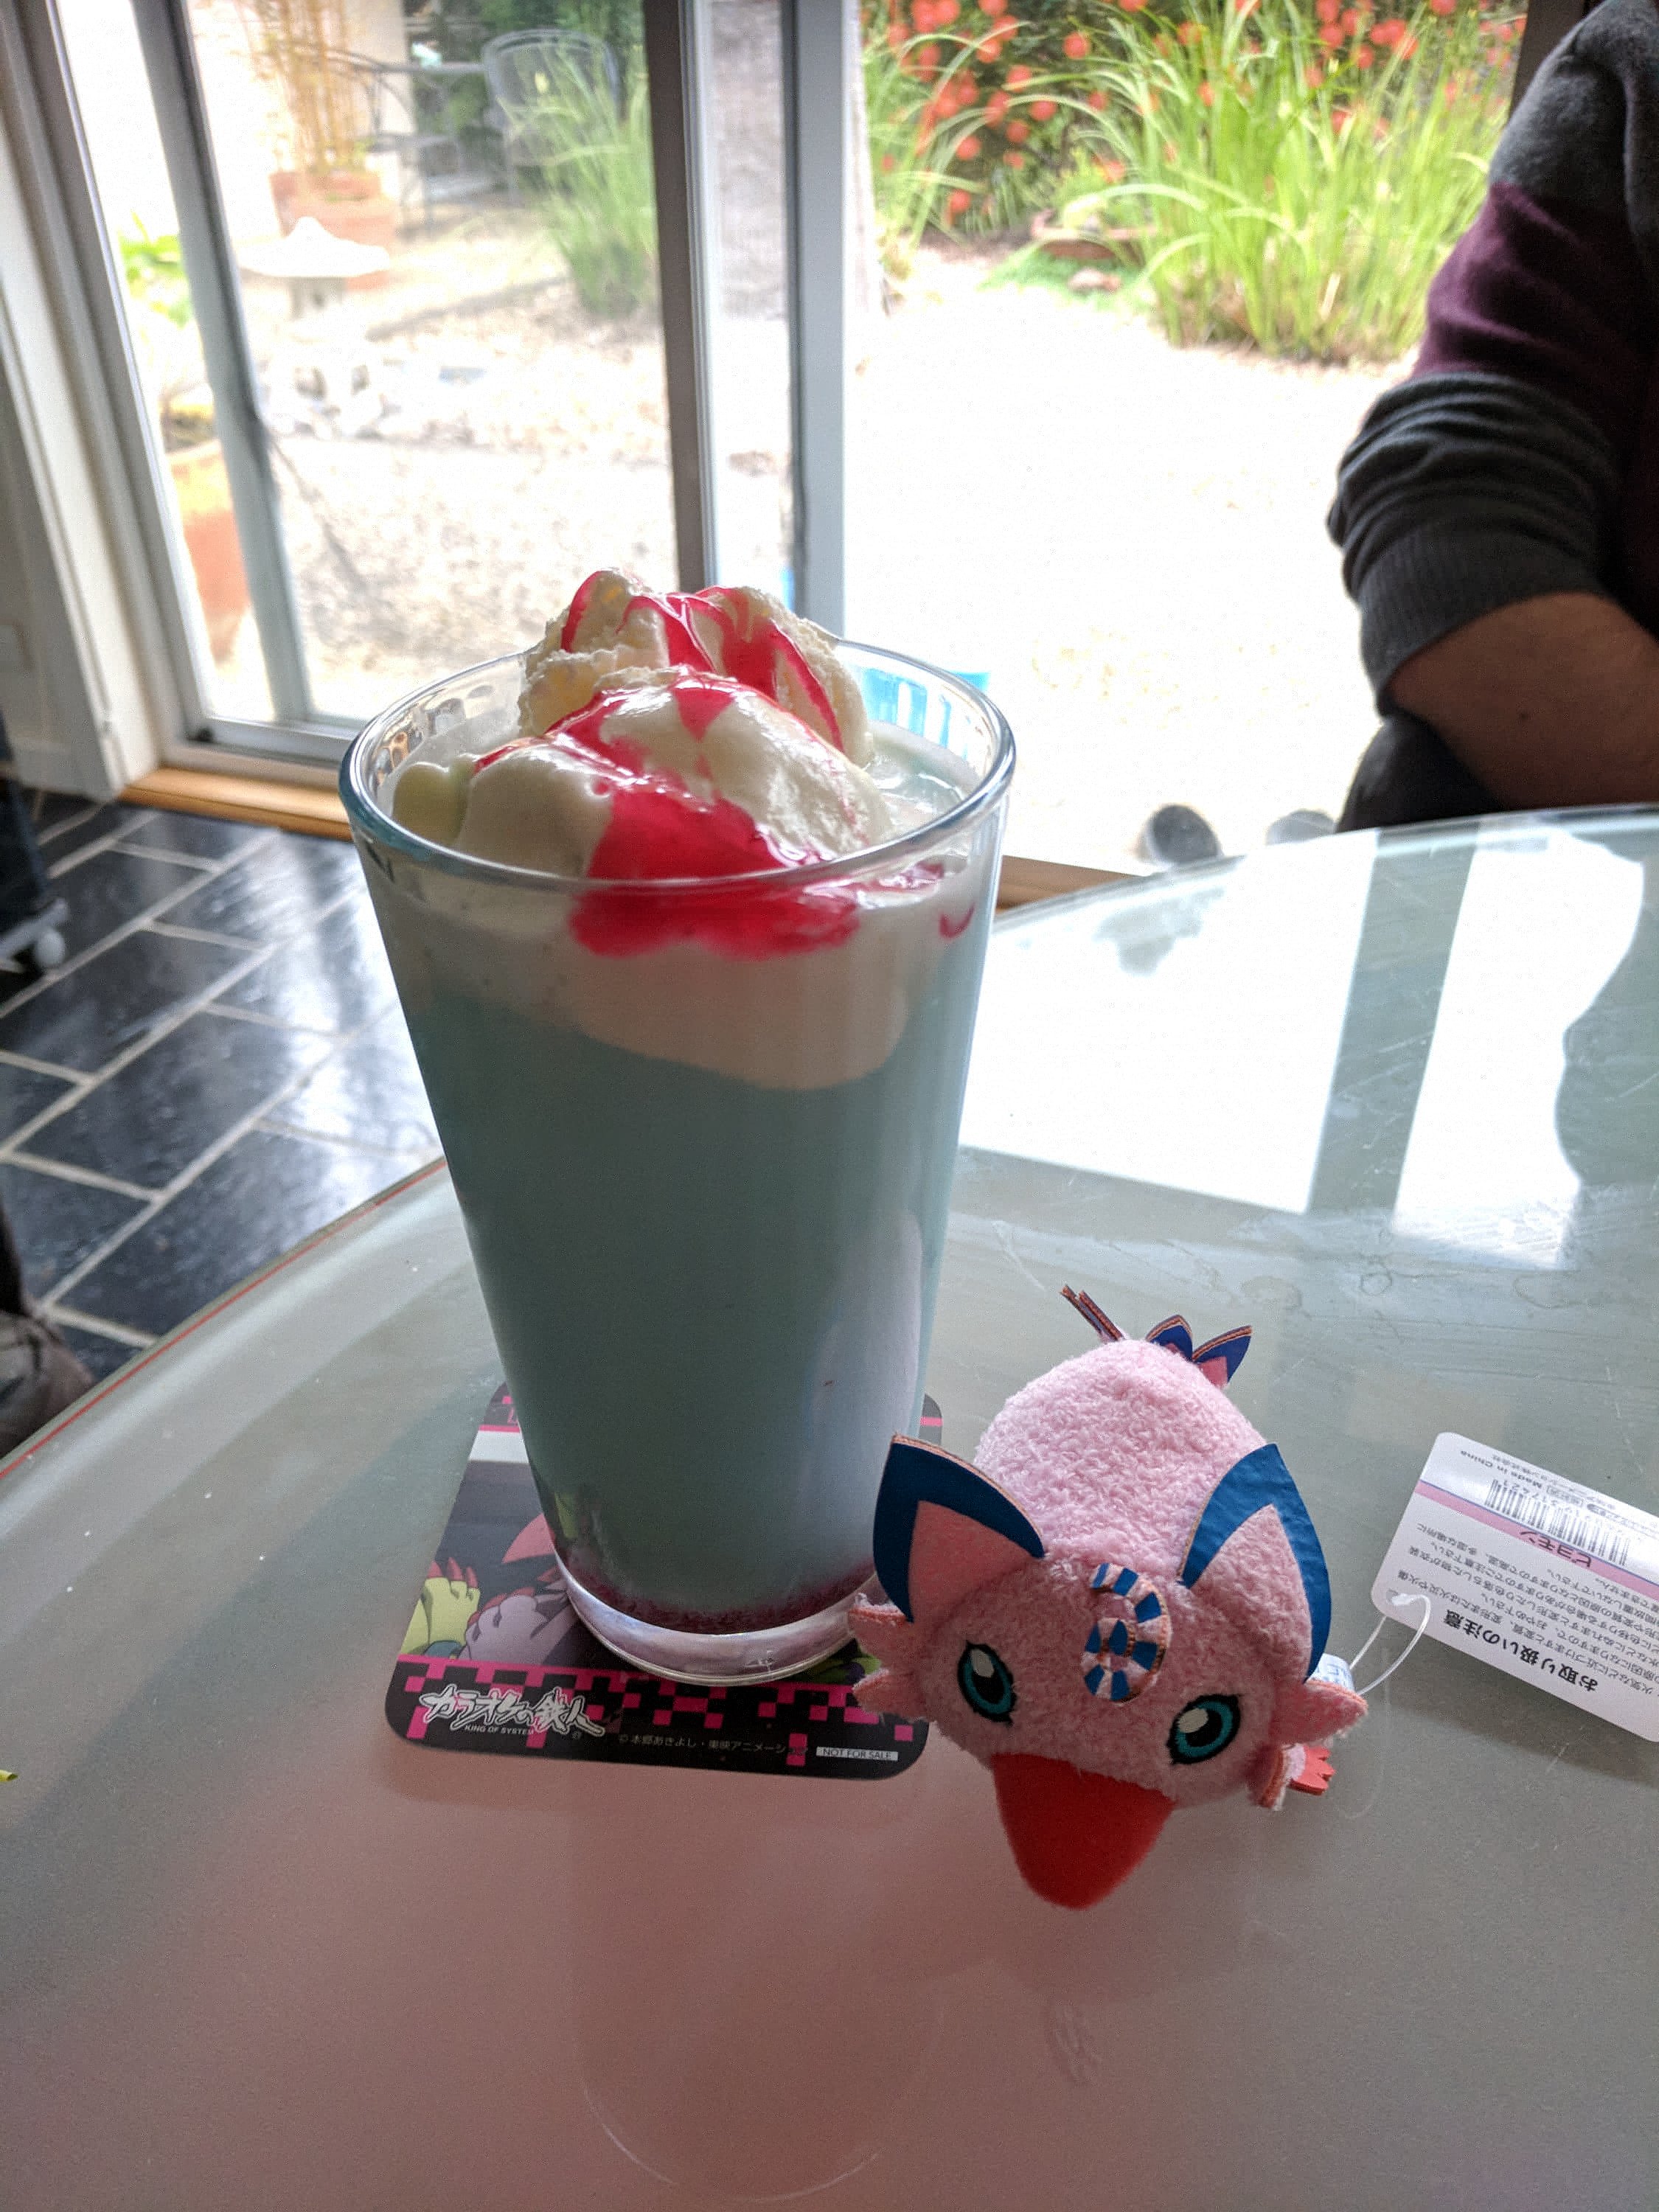 digimon Recreating the Digimon Pop-up Cafe Menu items: Piyomon's Sweet-Strawberry Drink Misc